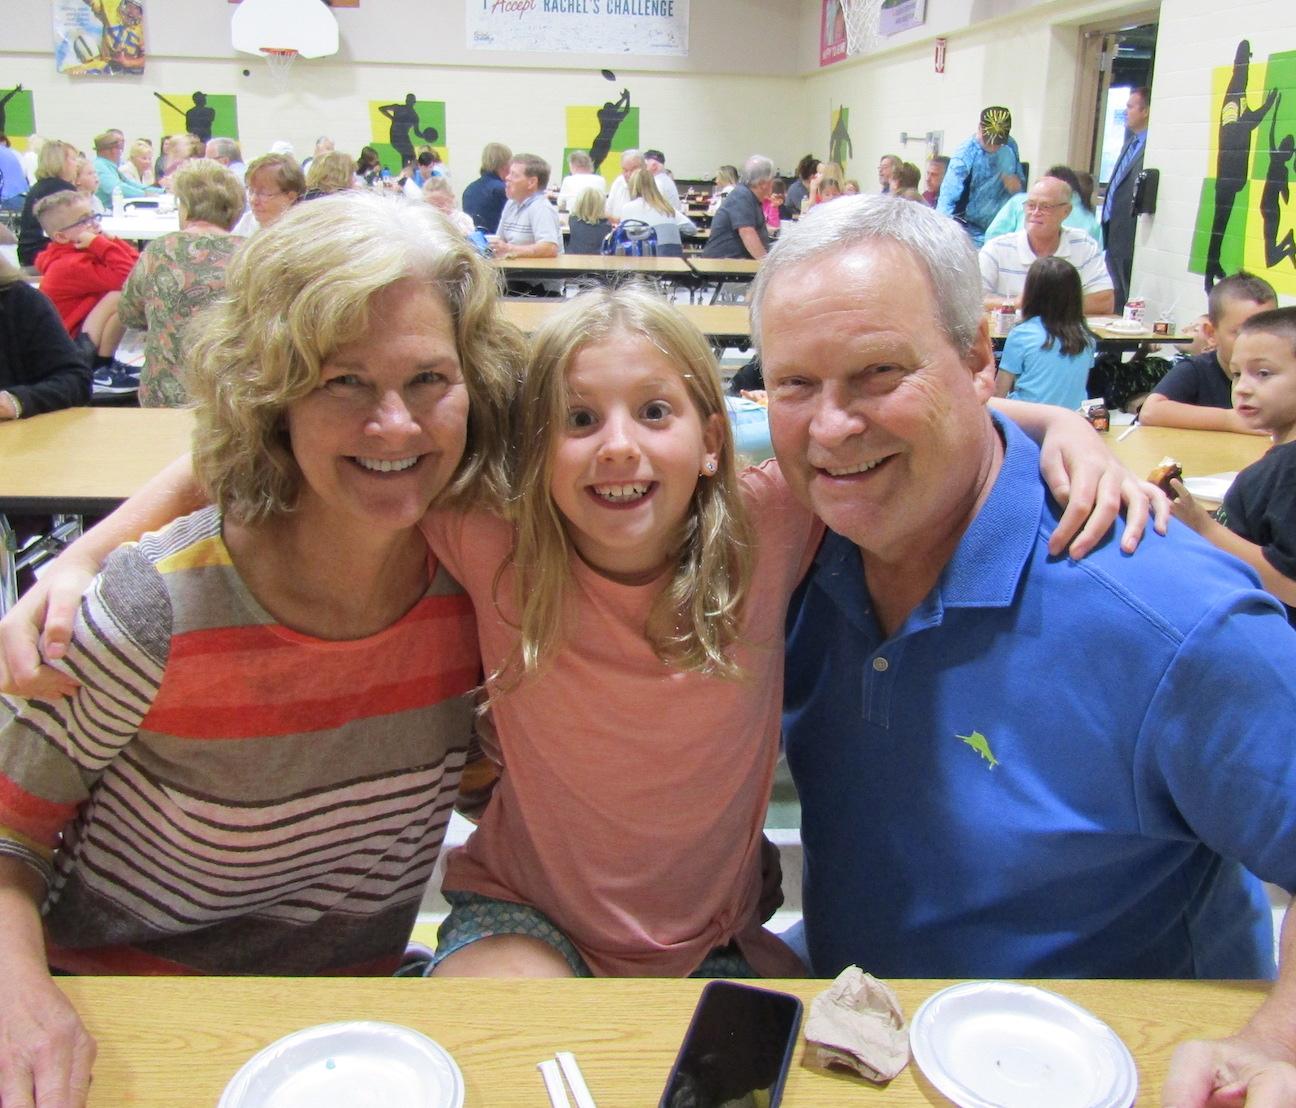 Kylie Diethorn, third grade, was excited to spend time with her grandparents